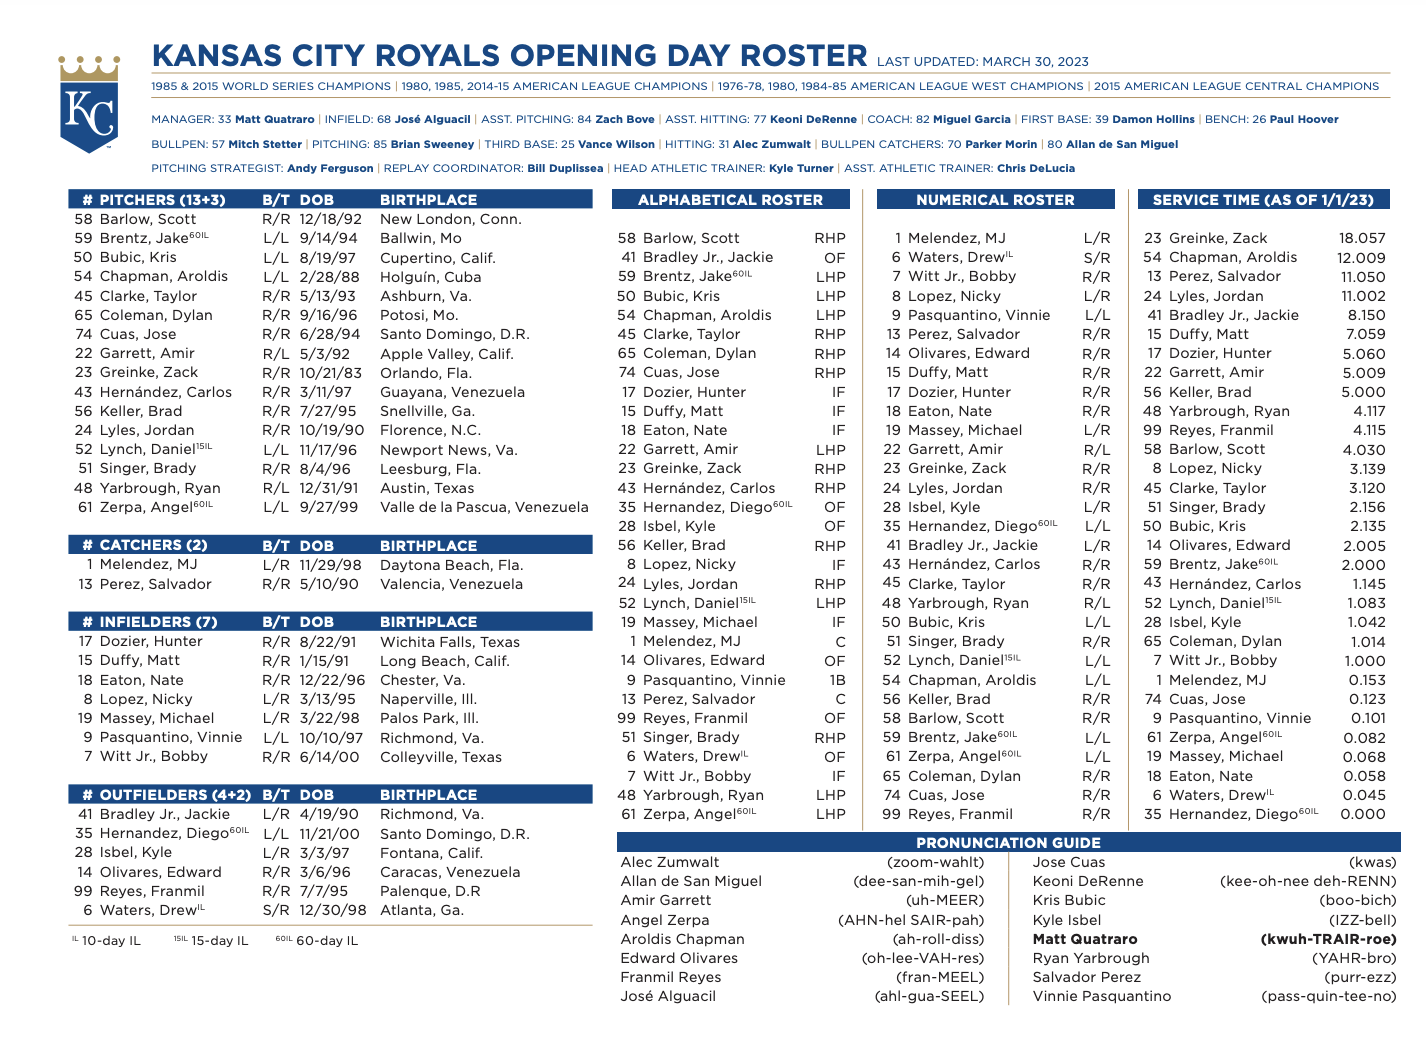 ROYALS ANNOUNCE 2023 OPENING DAY ROSTER